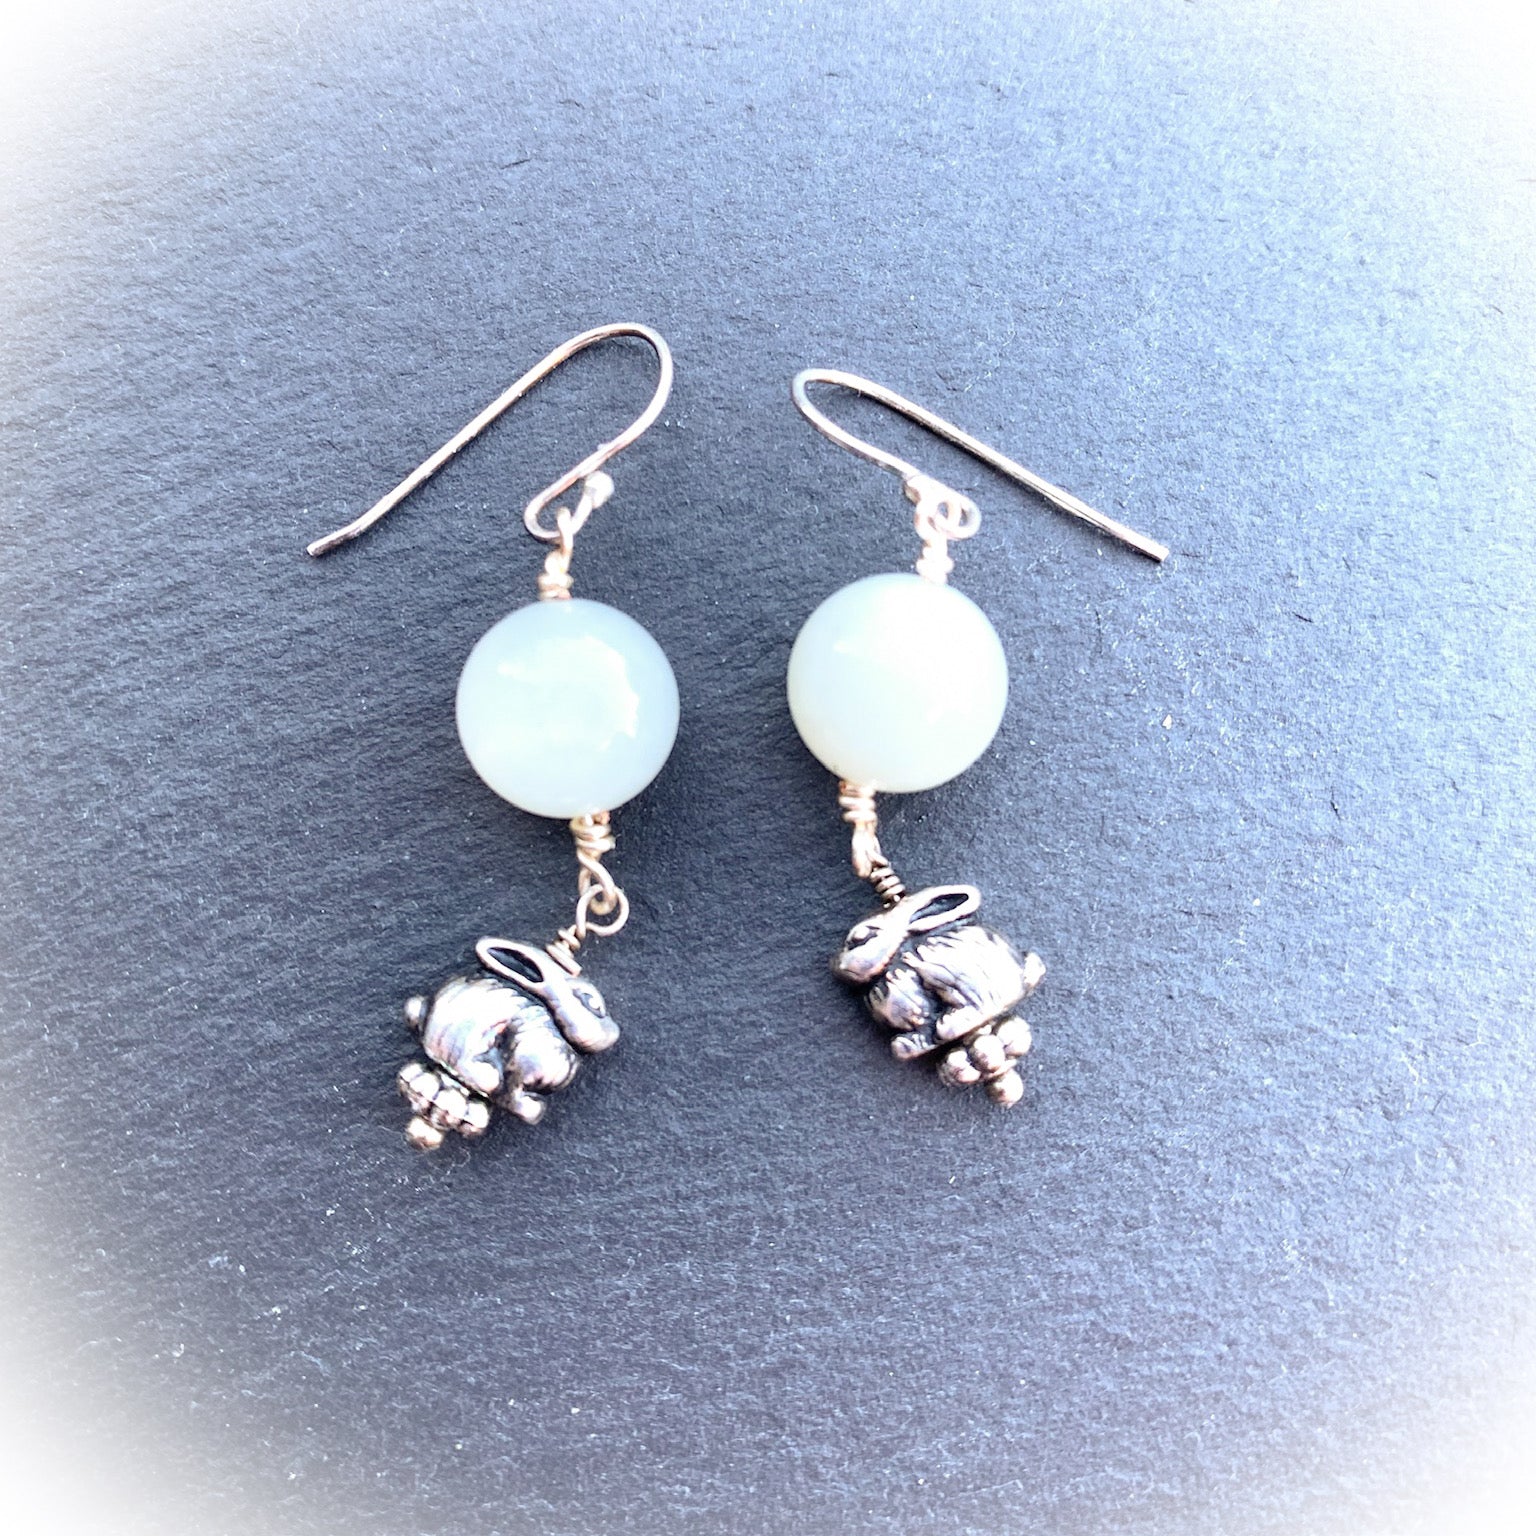 Lunar Rabbit Earrings With Grey Moonstone And Pewter Rabbits/Hares With 925 Sterling Silver Ear-wires - Darkmoon Fayre